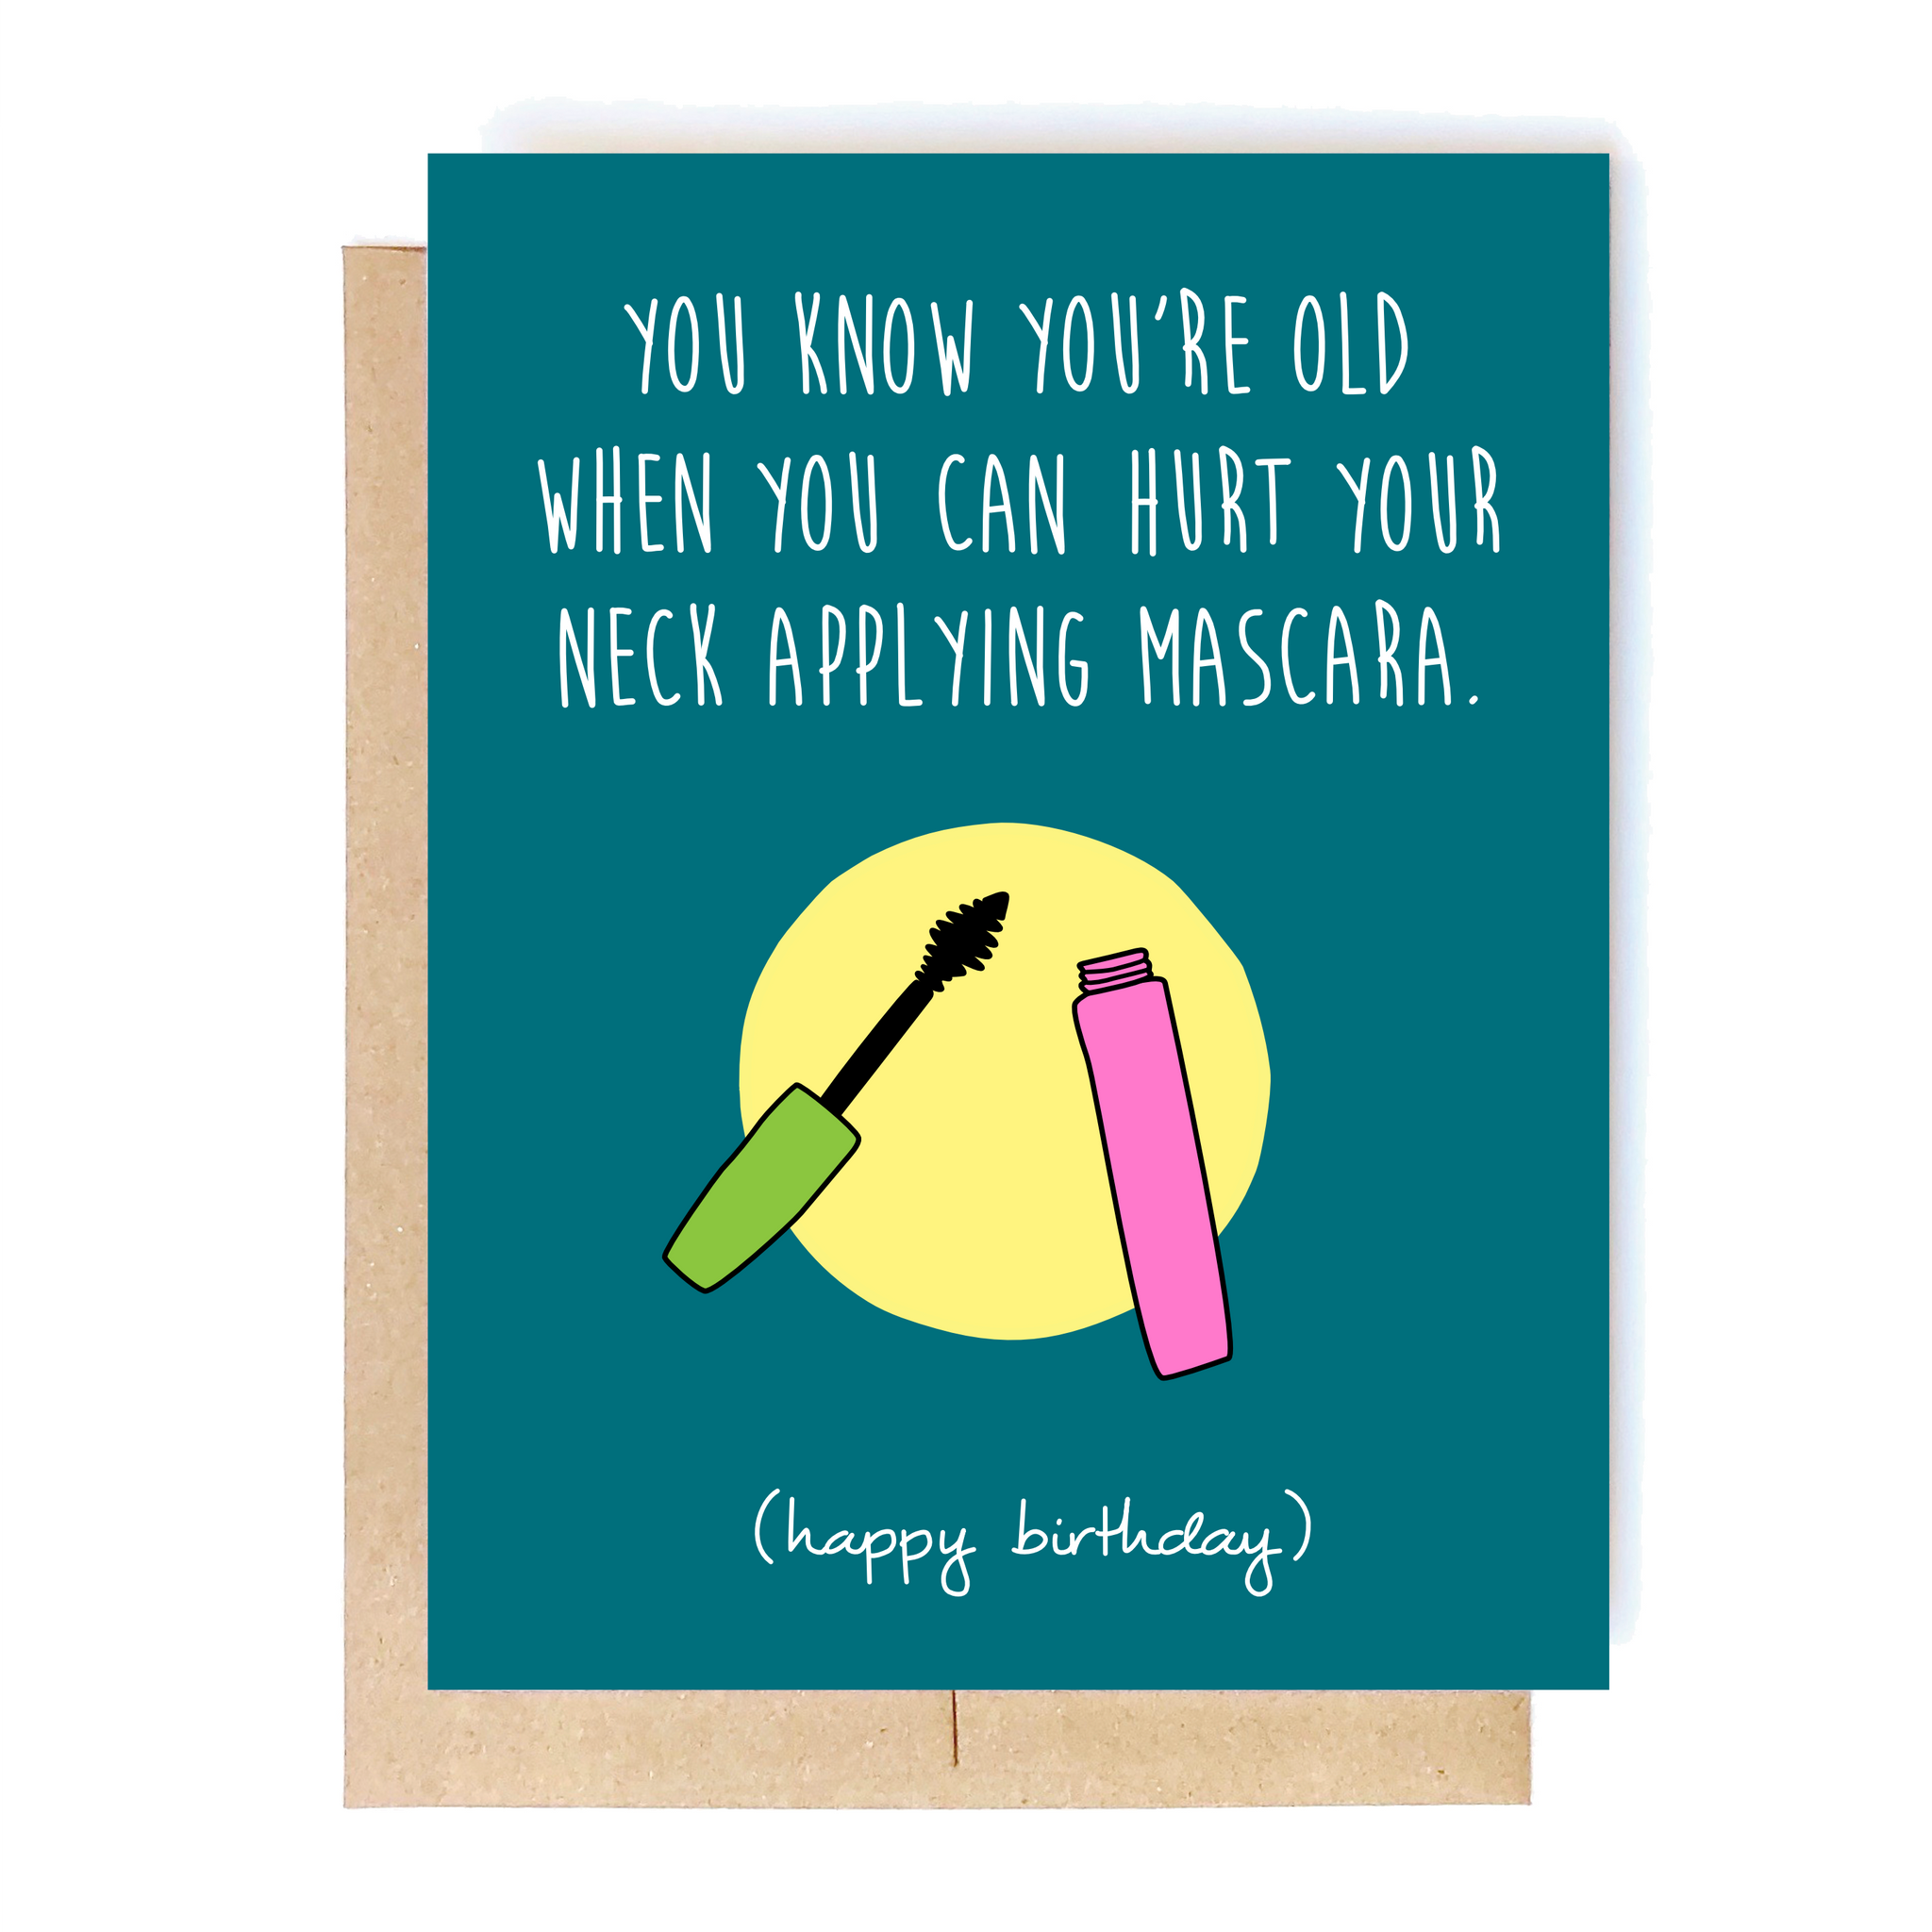 Card Front: You know you're old when you can hurt your neck applying mascara. (happy birthday)